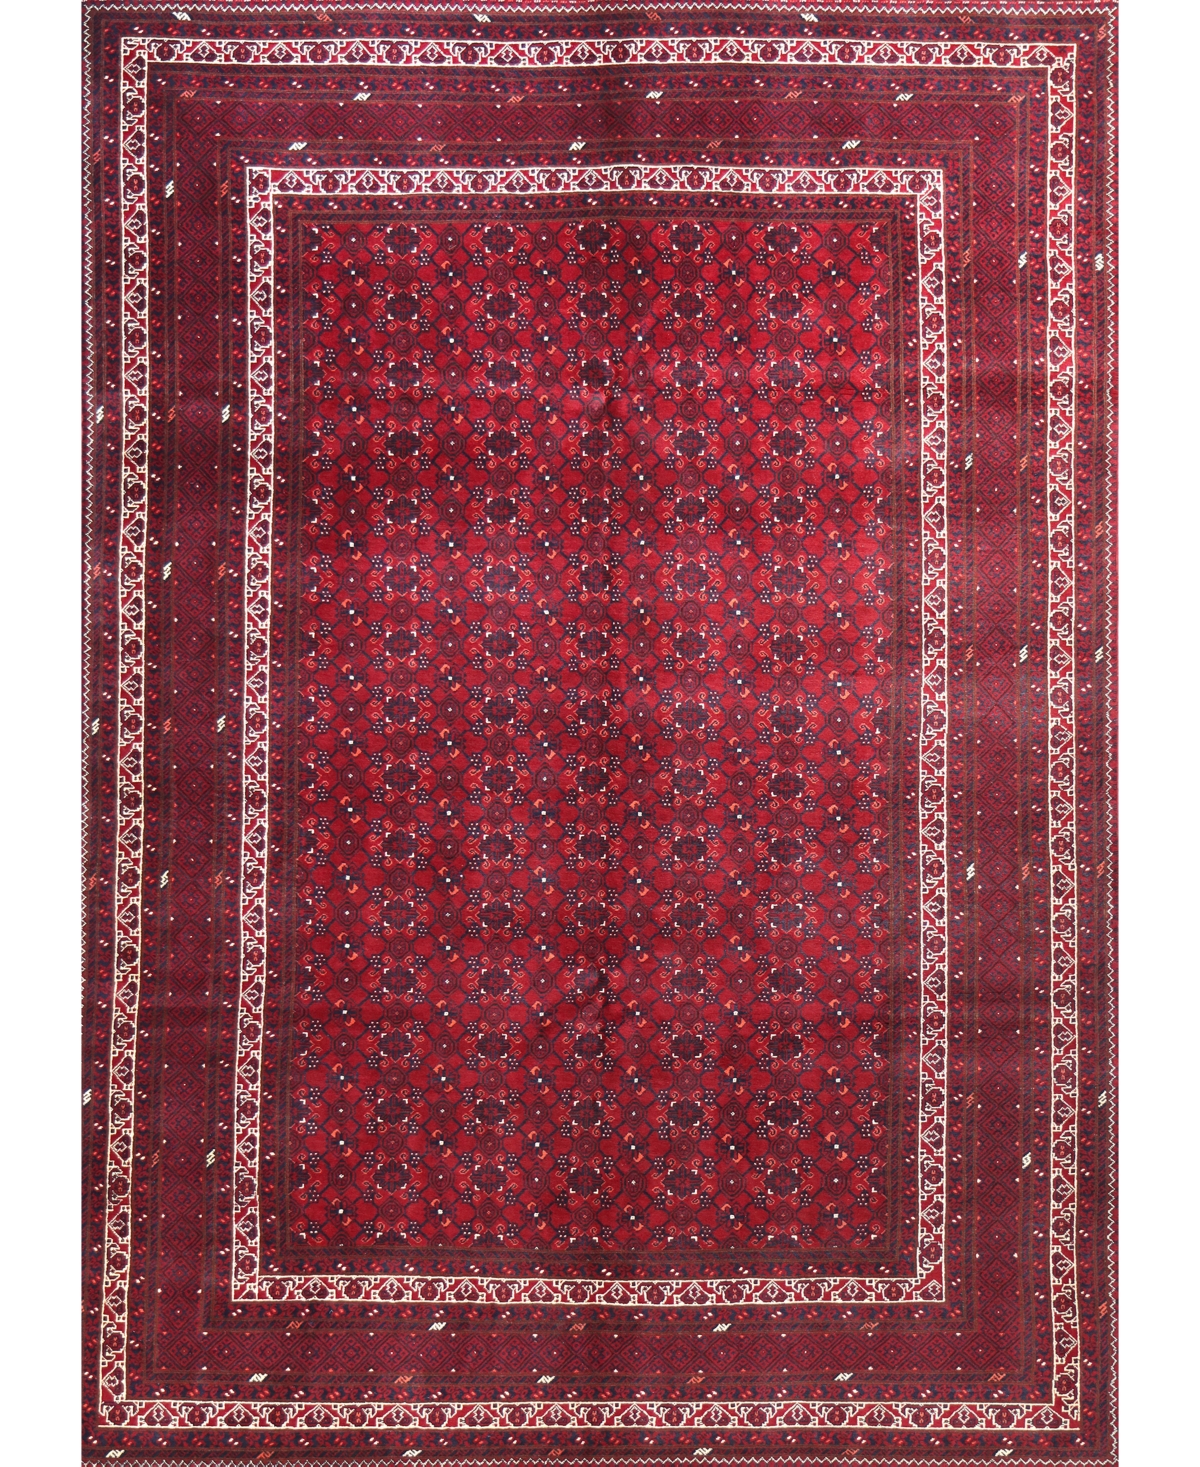 Bb Rugs One Of A Kind Fine Beshir 6'7" X 9'6" Area Rug In Red